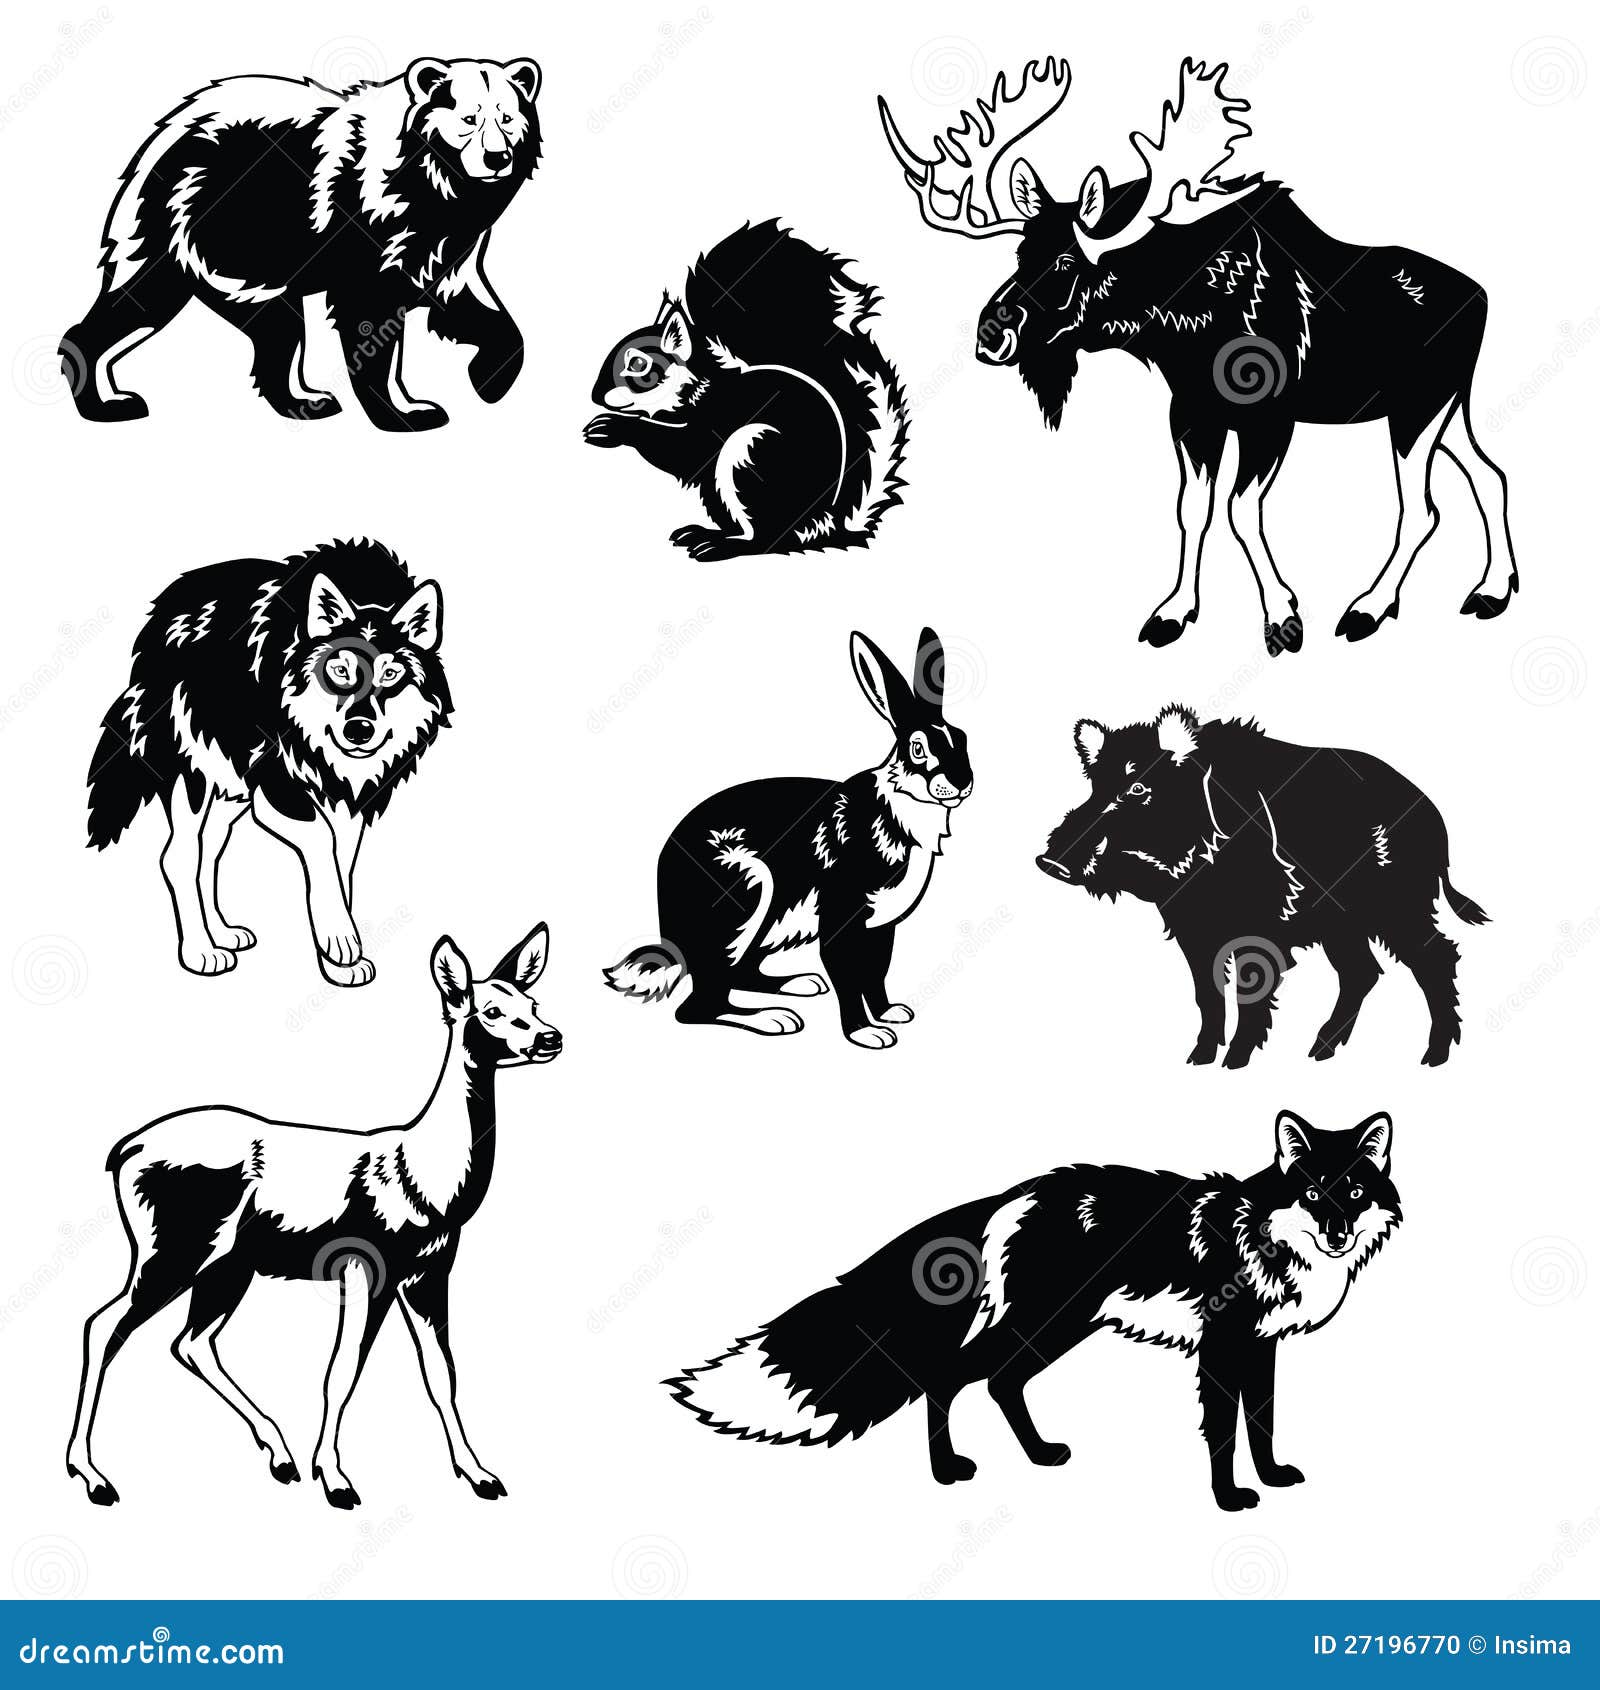 forest animals clipart black and white - photo #8